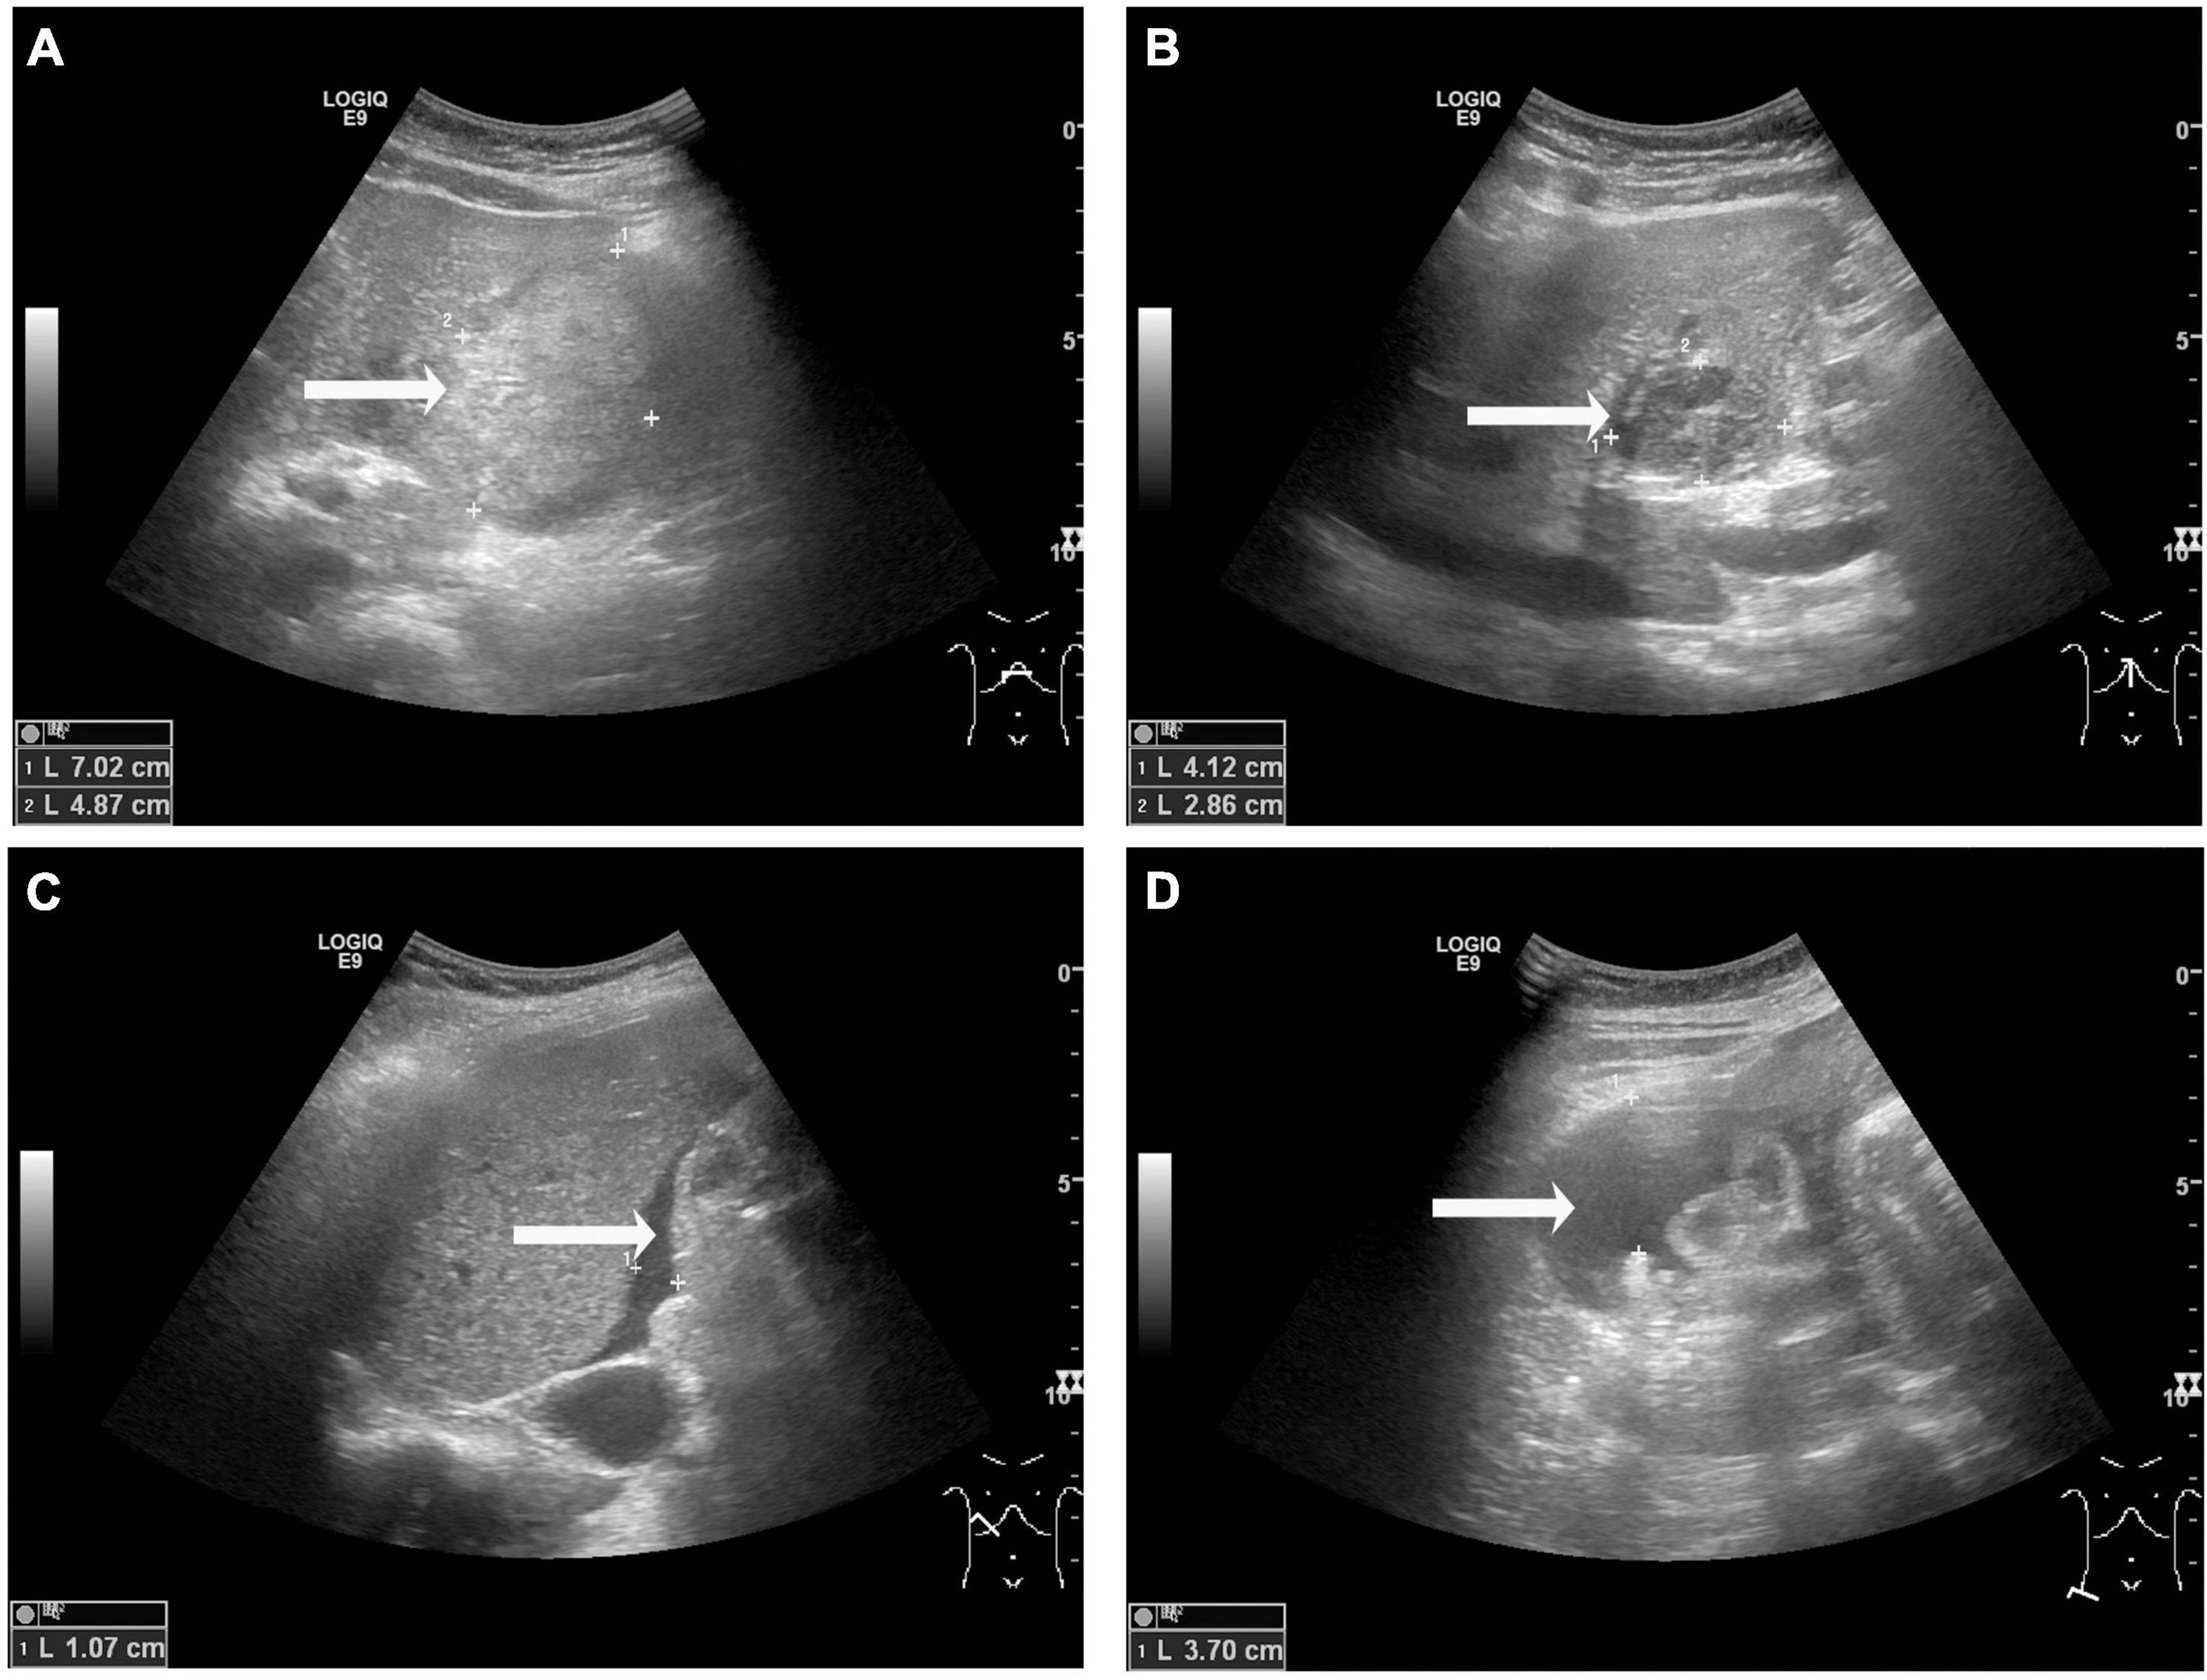 Frontiers Spontaneous Hepatic Rupture During Late Pregnancy In A